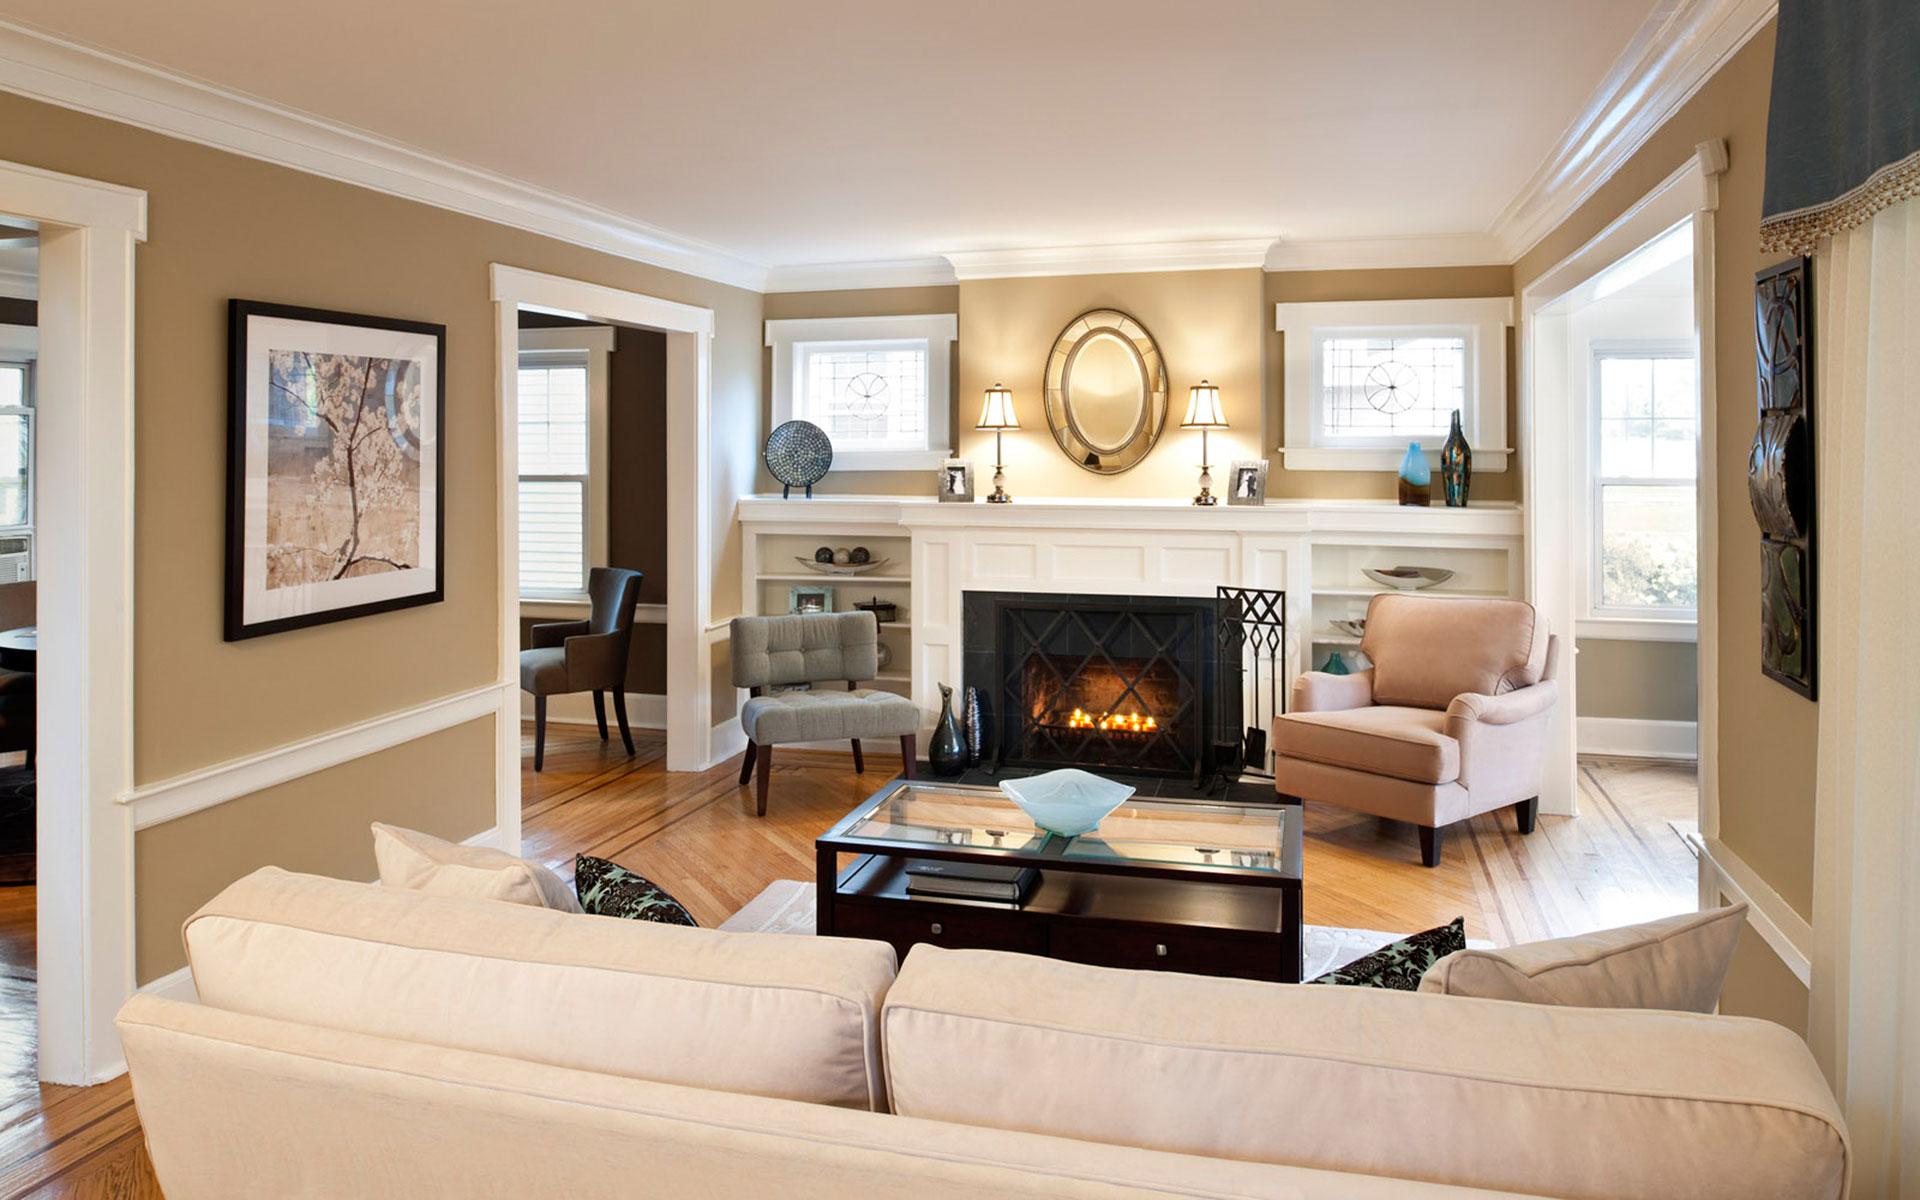 Traditional Interior Design Ideas: Lightweight Classics. Neutral beige walls and electric fireplace